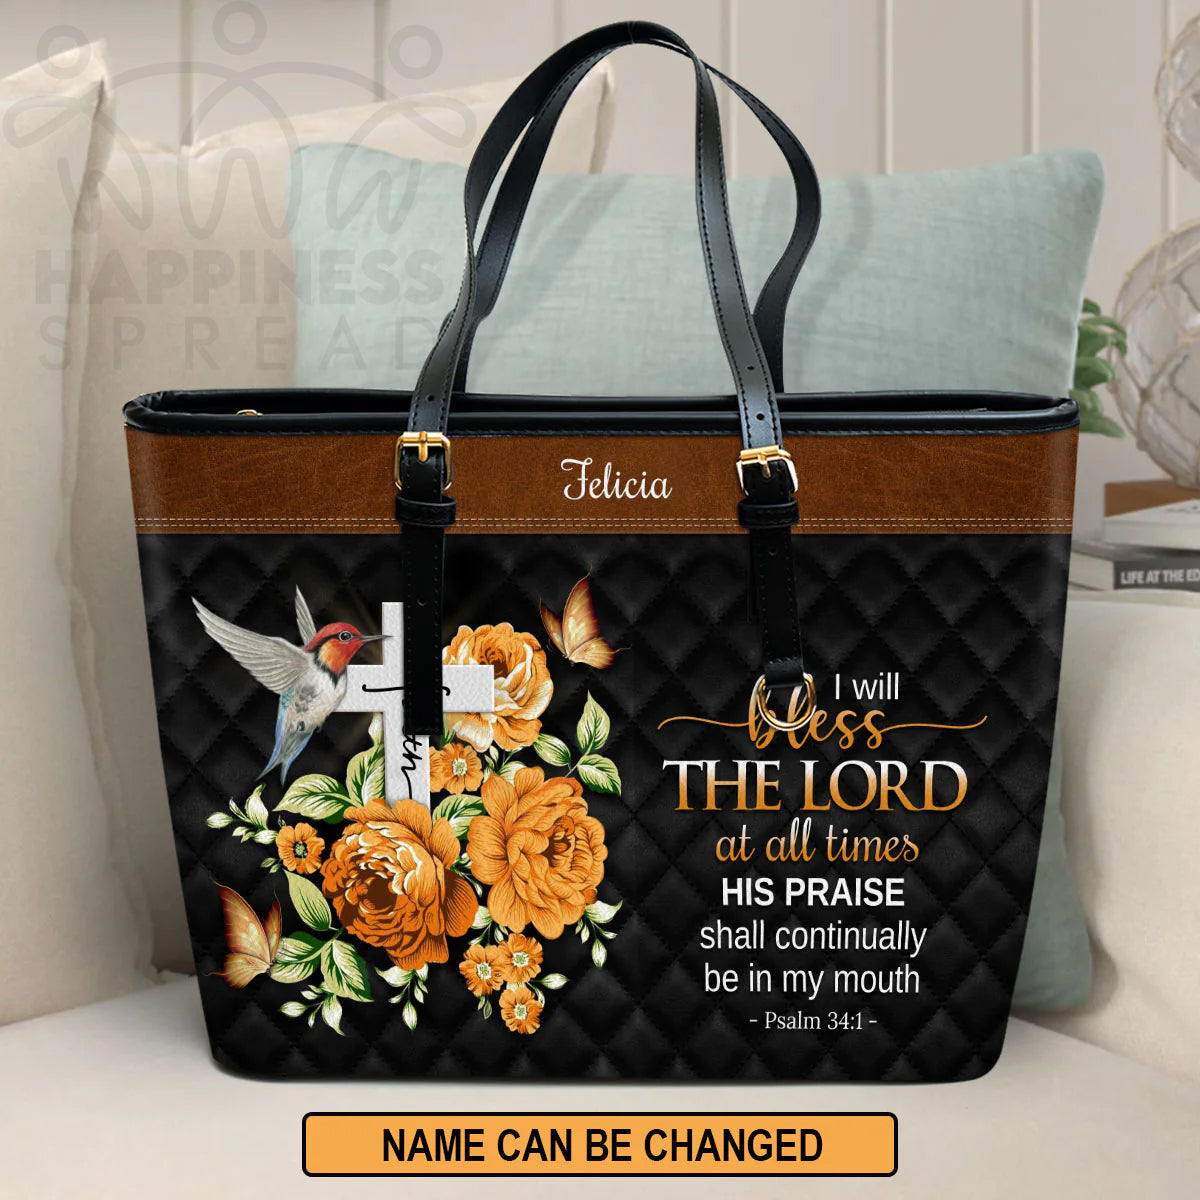 Christianart Handbag, Personalized Hand Bag, I Will Bless The Lord At All Times, Personalized Gifts, Gifts for Women. - Christian Art Bag